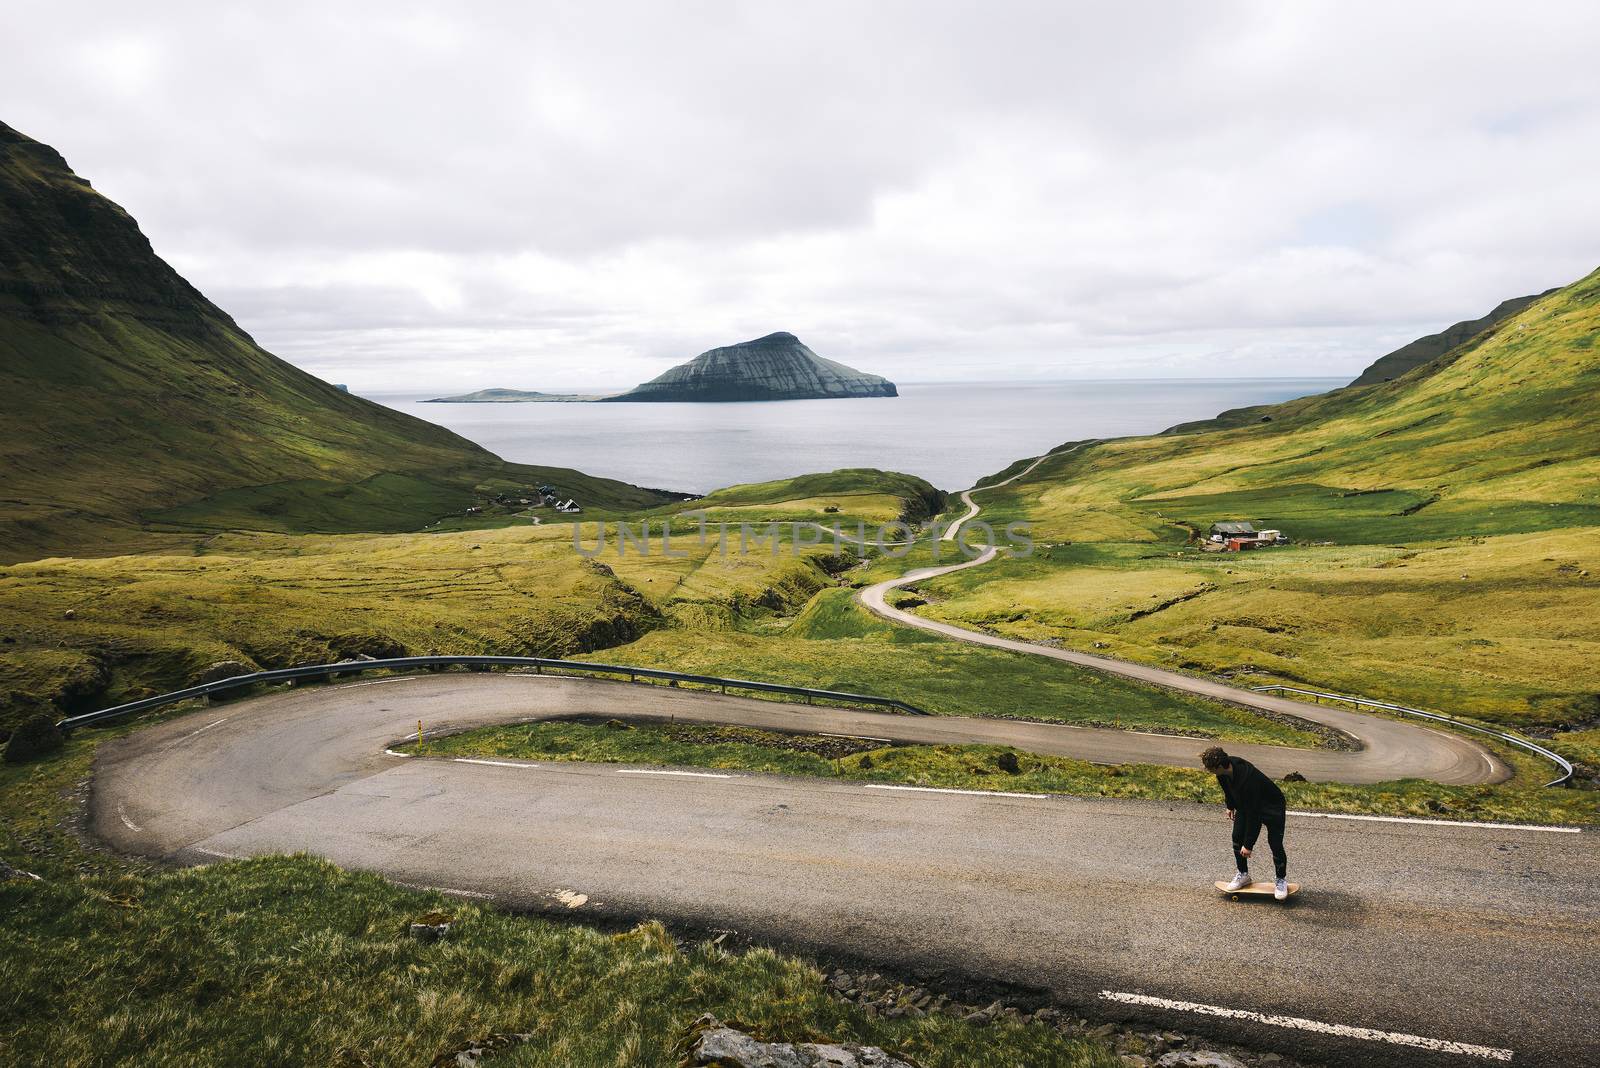 Young skater riding a skateboard on a winding road of Faroe Islands surrounded by beatiful scenery